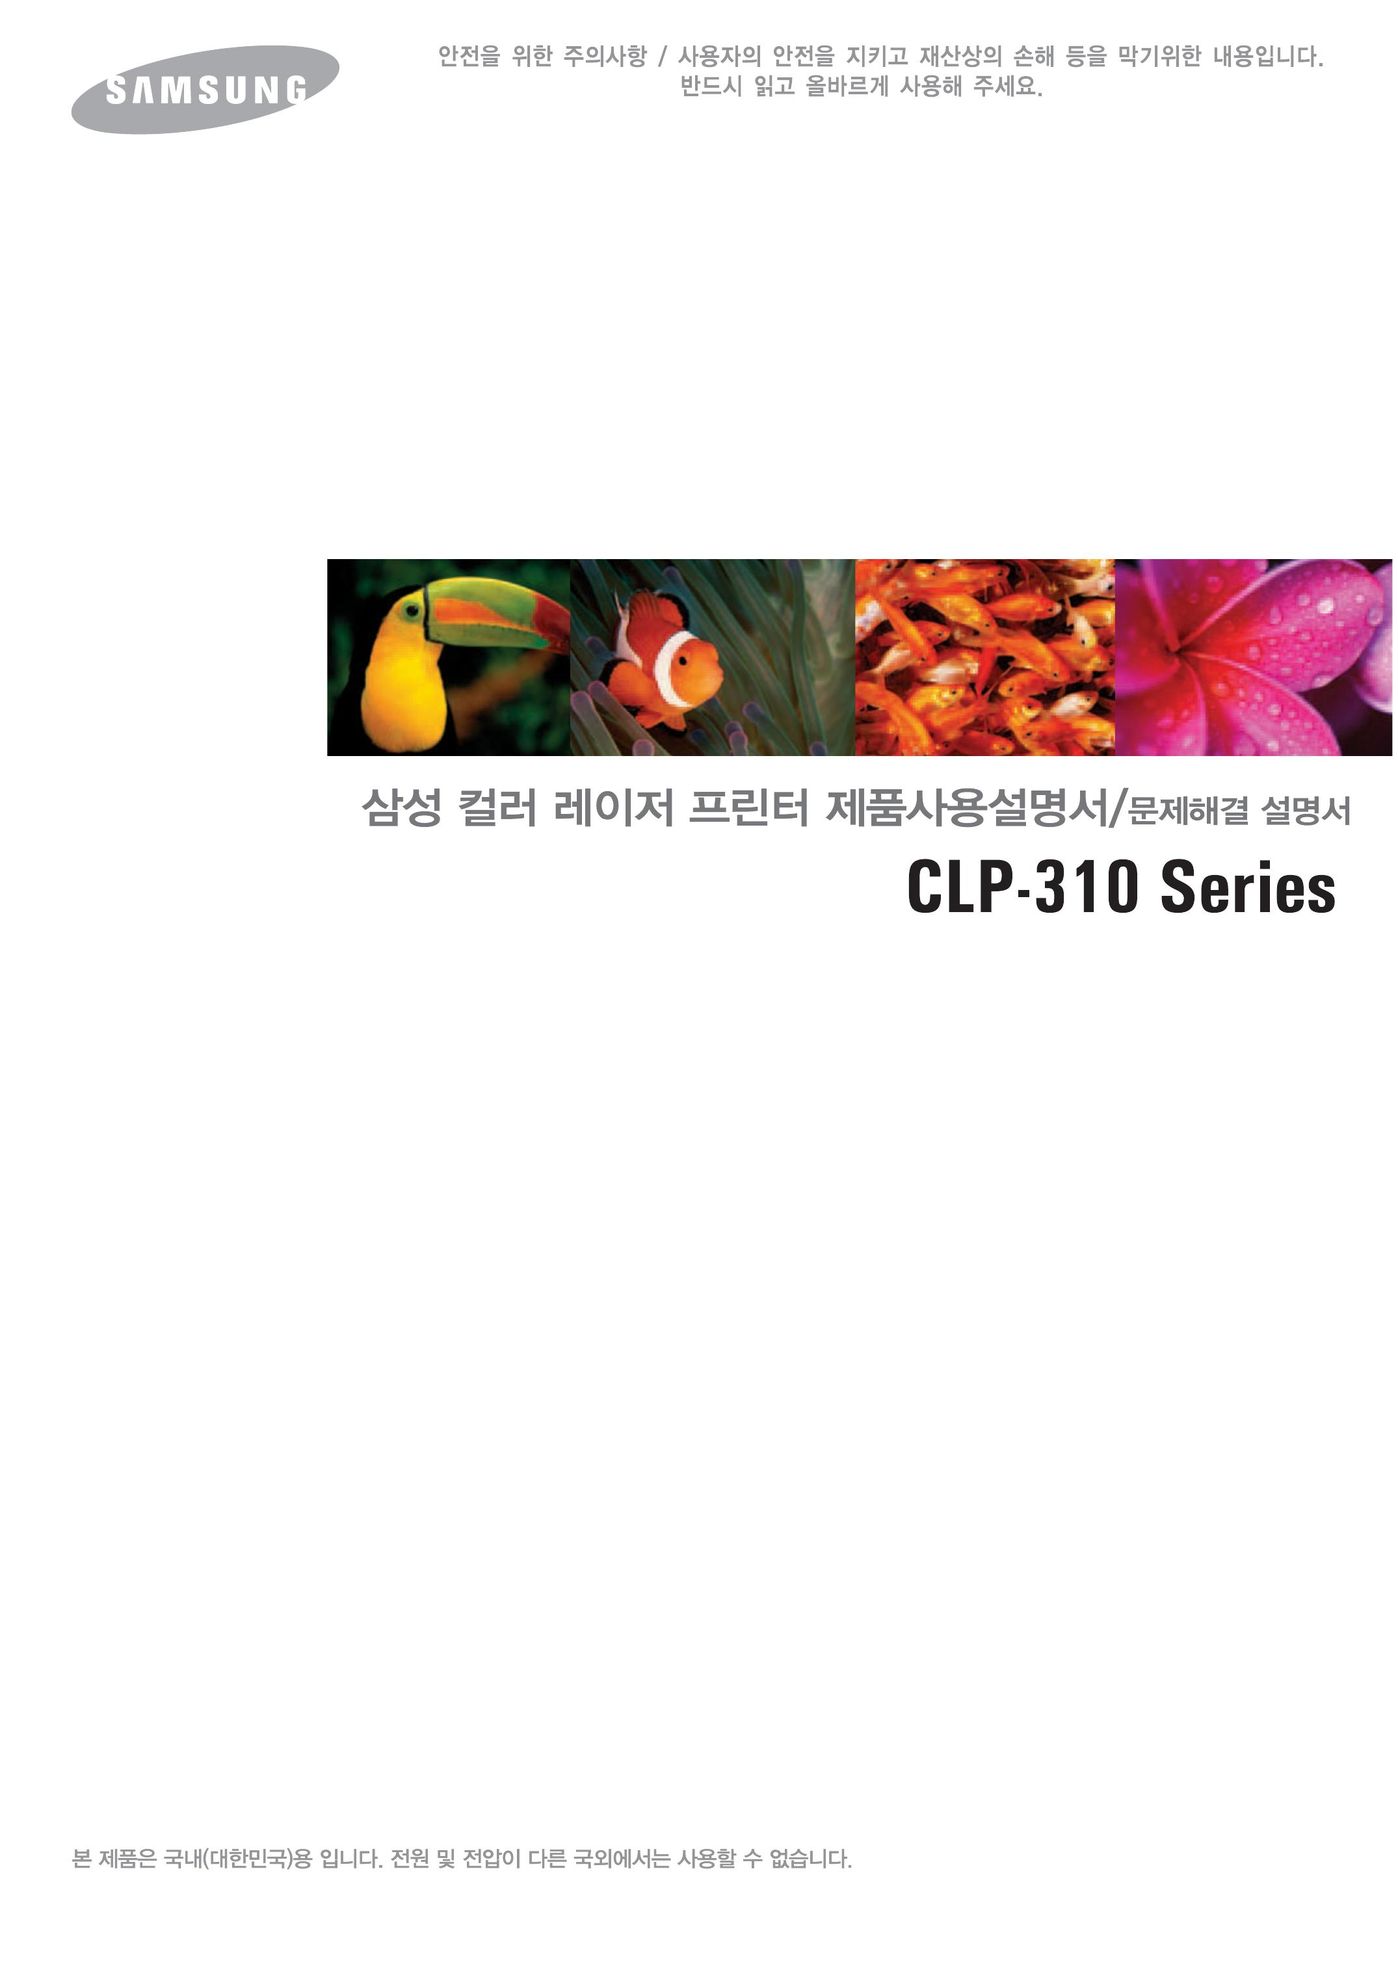 Samsung CLP-310KG All in One Printer User Manual